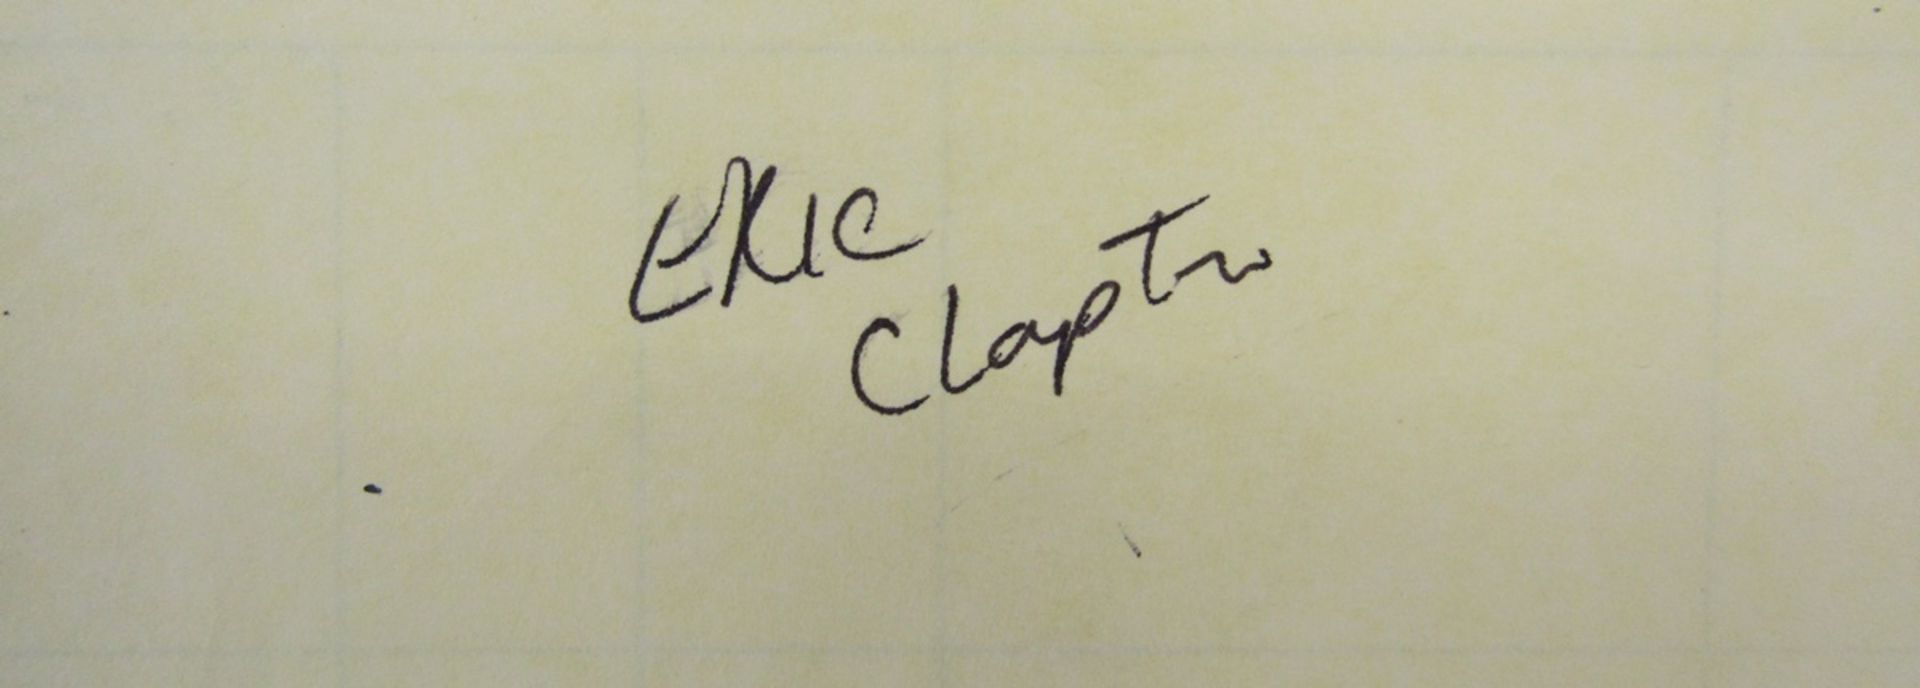 Autograph album, 20th century, to include actors, singers and other celebrities, including Elton - Image 20 of 20